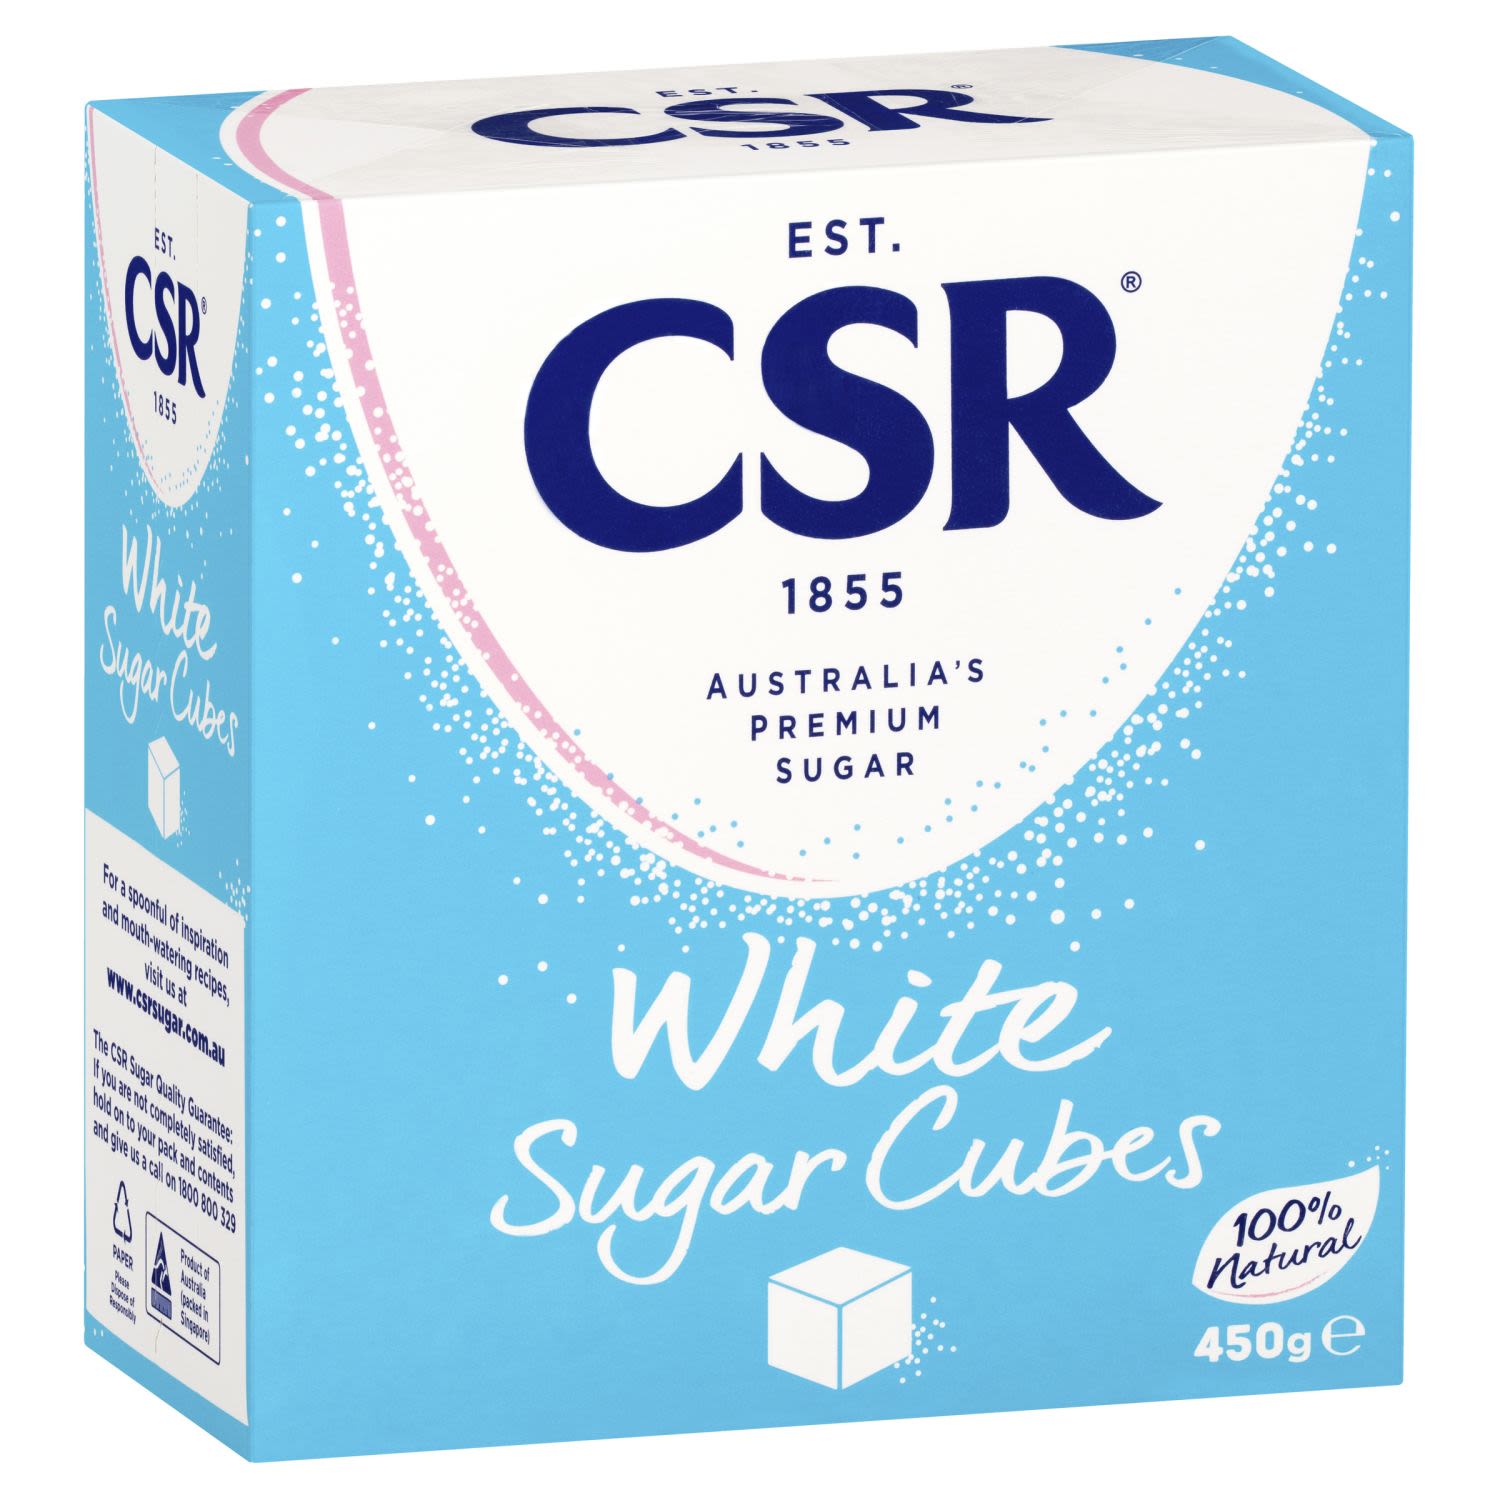 Sweetening your morning cuppa is now easier with CSR White Sugar Cubes. Made from 100% Australian sugarcane, it's the best way to whip up everyone's favourite coffee or tea according to their preferred level of sweetness. Just drop a cube or two in, stir until it dissolves, and enjoy your perfectly sweetened drink.<br /> <br />